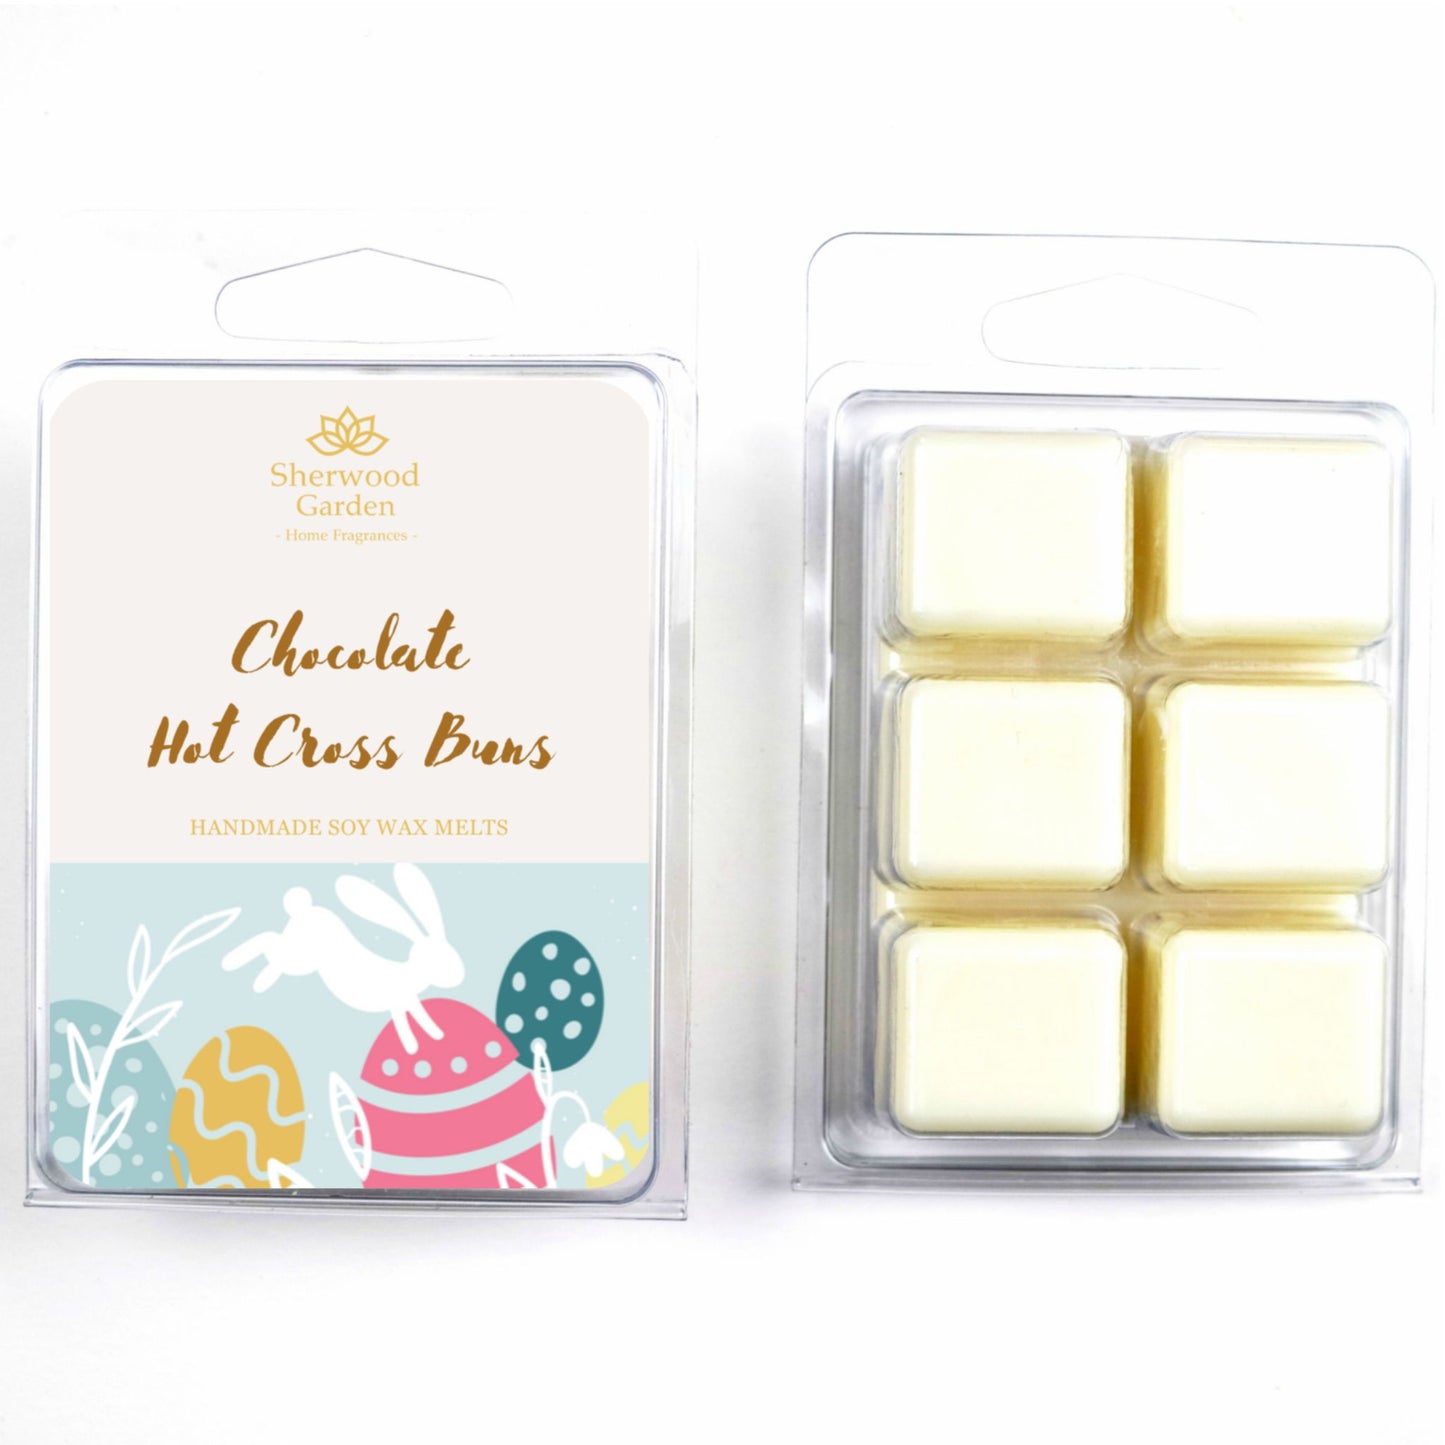 Chocolate Hot Cross Buns Soy Wax Melts 70g (Limited Edition)